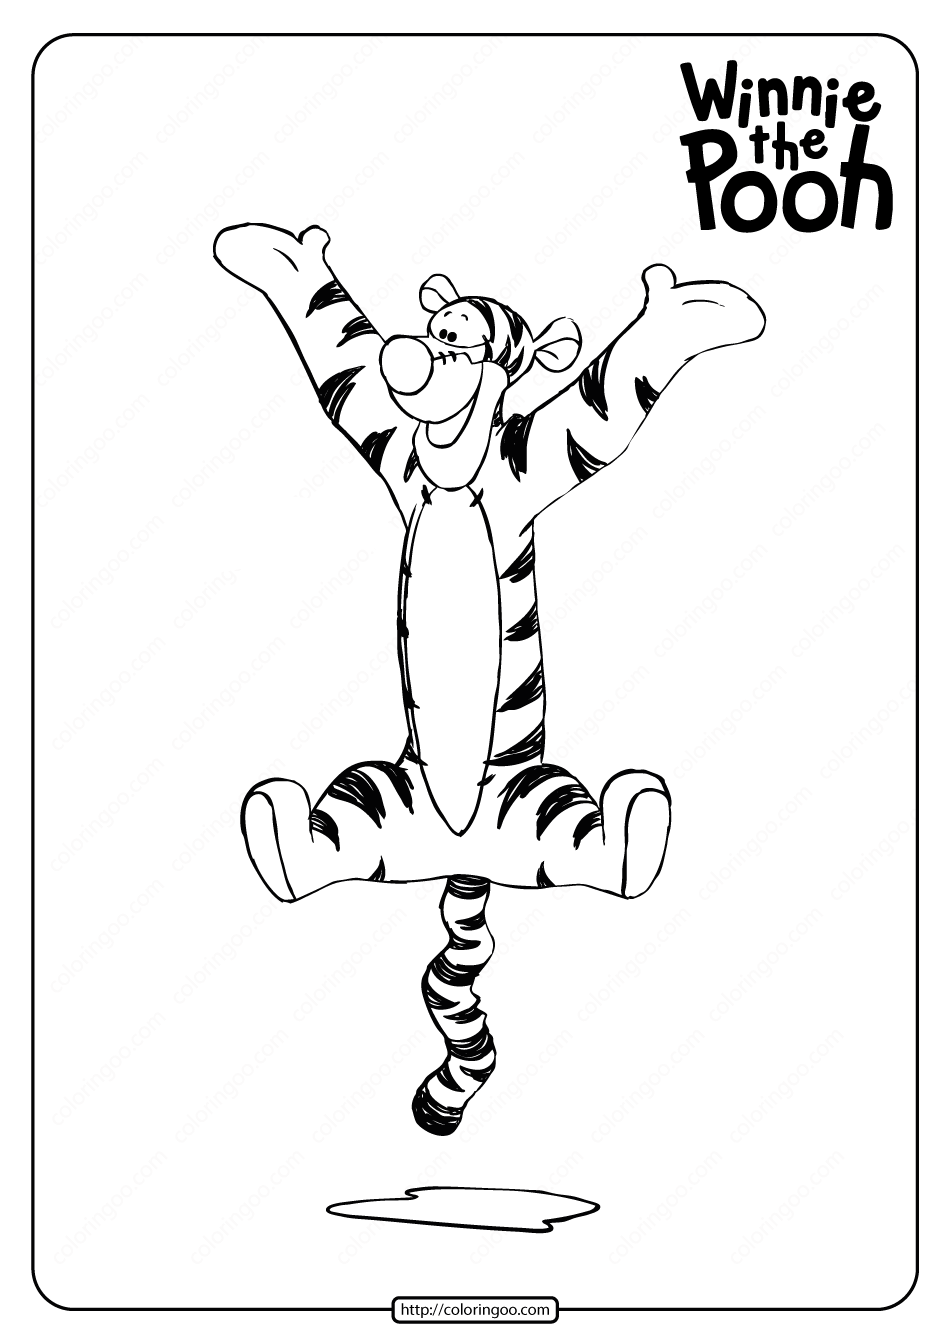 printable winnie the pooh tigger coloring page